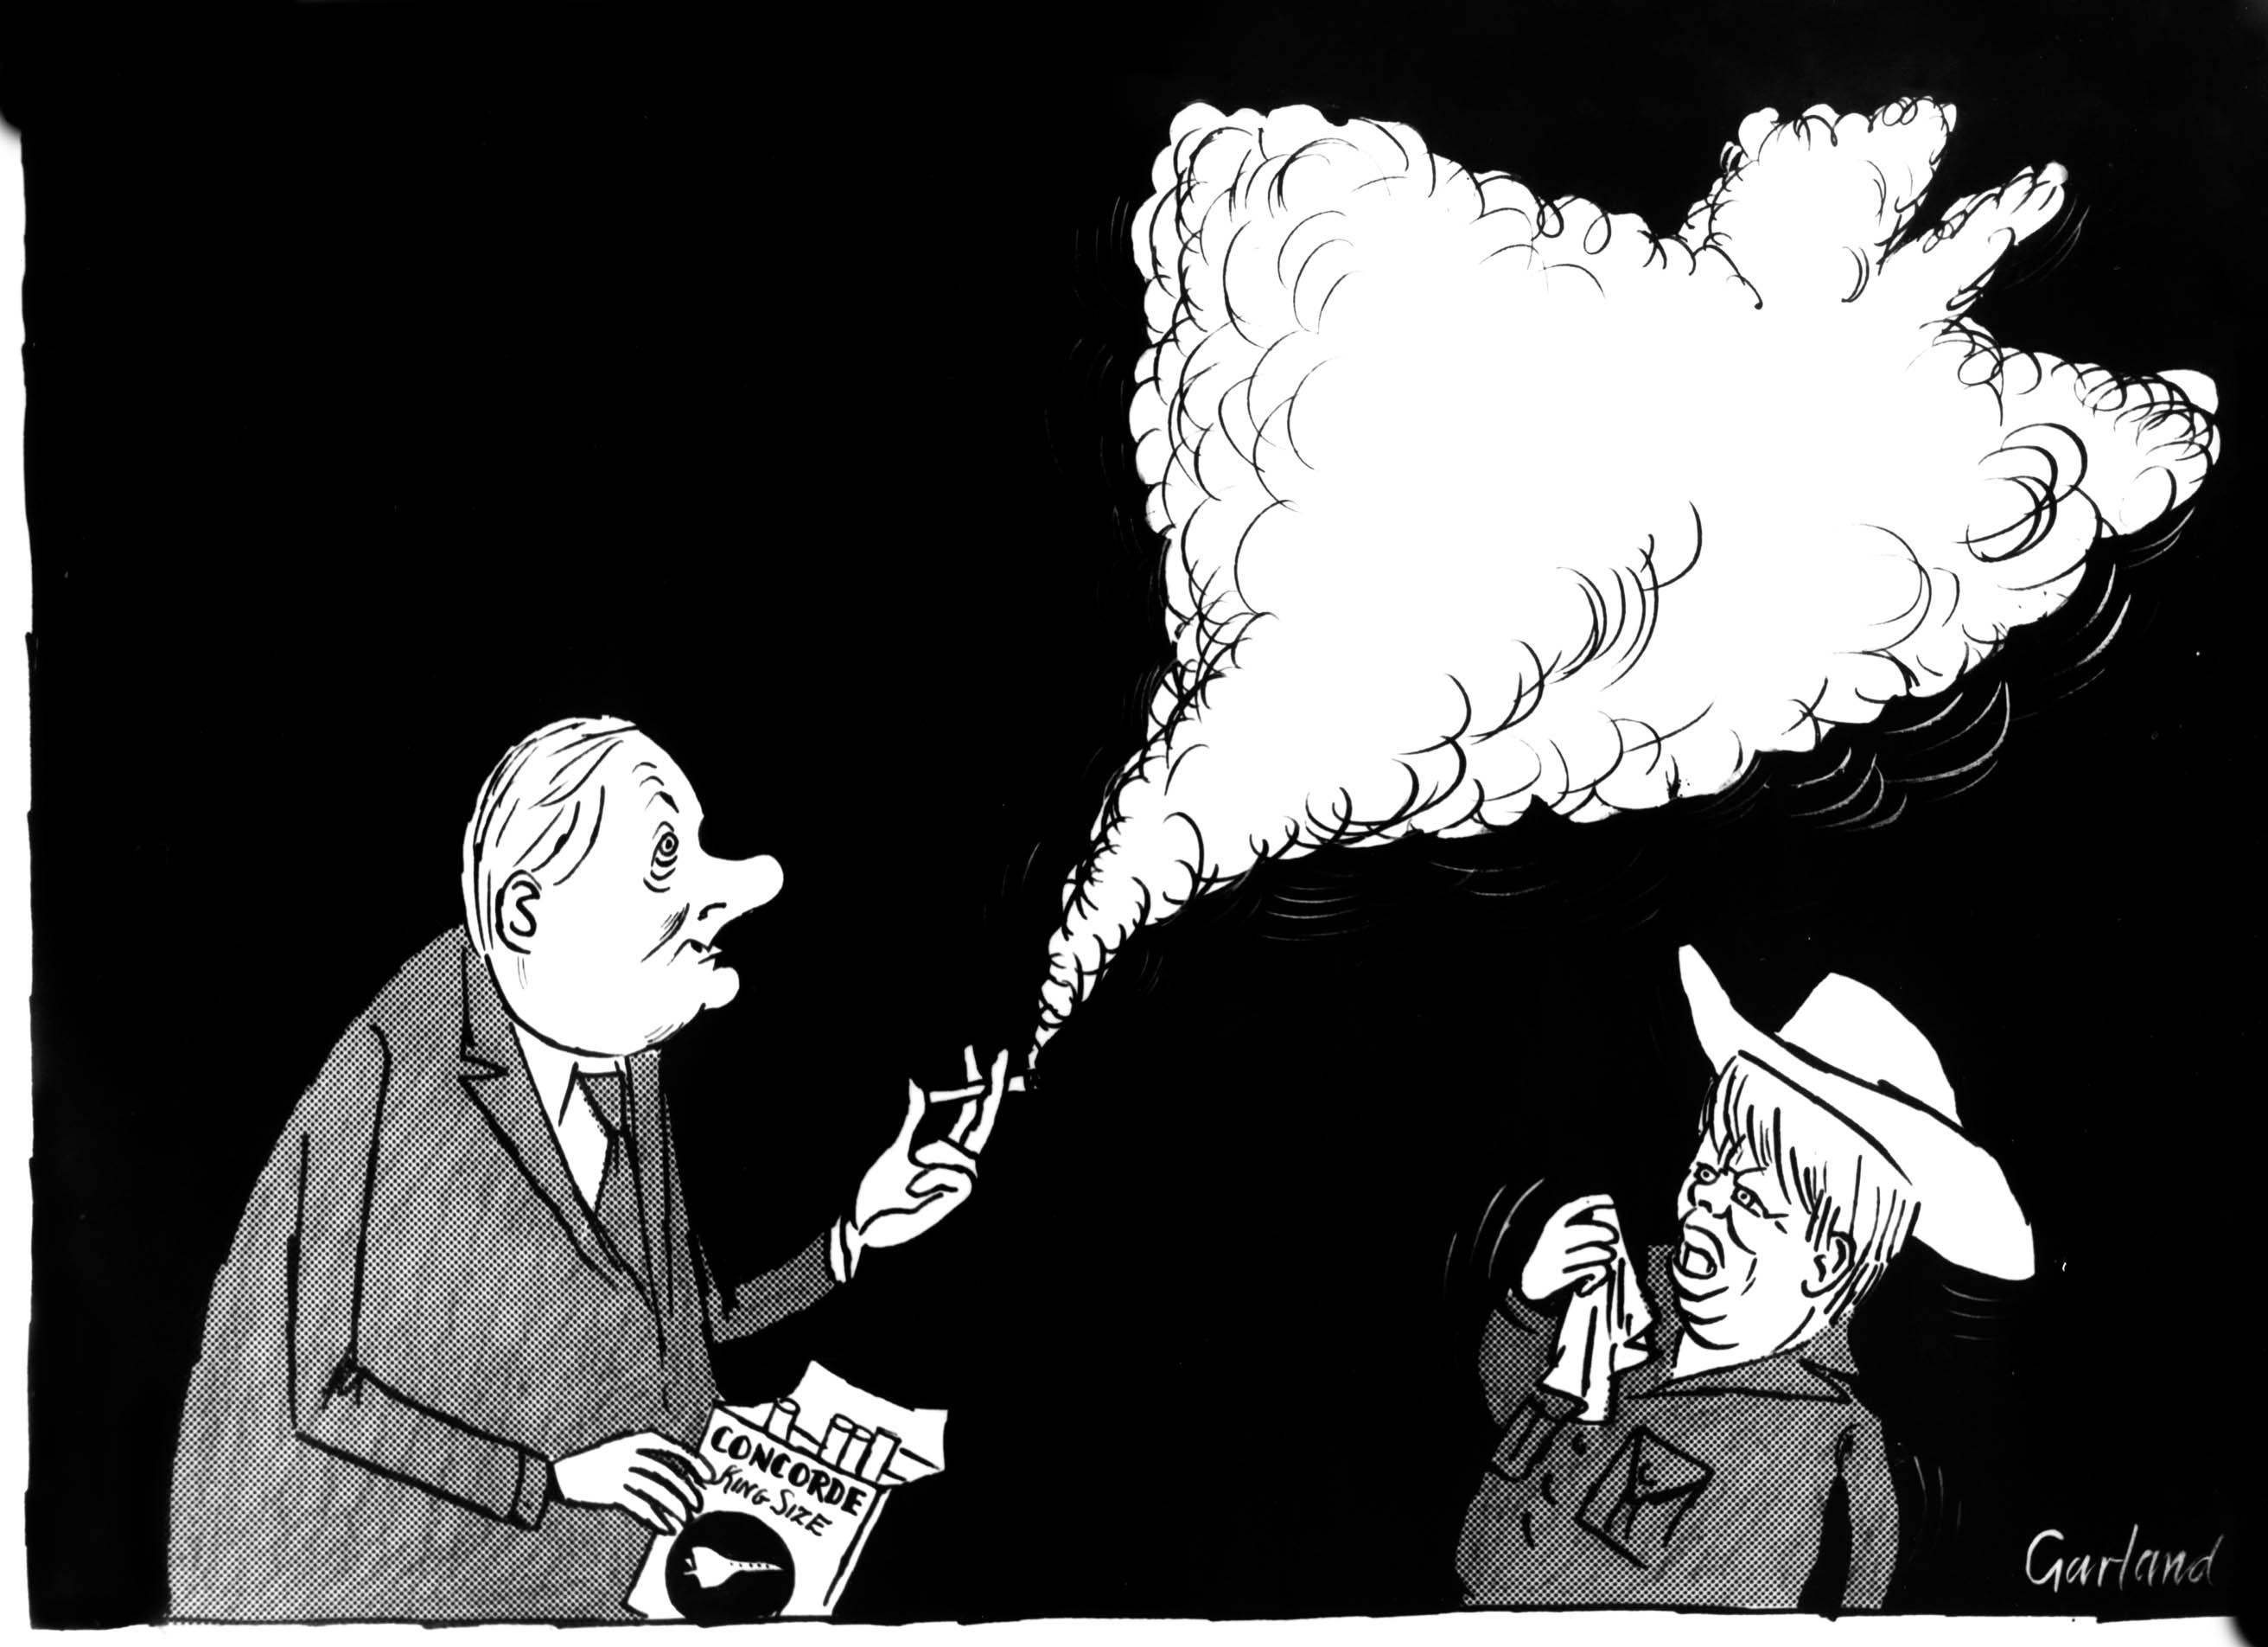 A 1977 cartoon showing smoke from a cigarette as a gaseous cloud. 